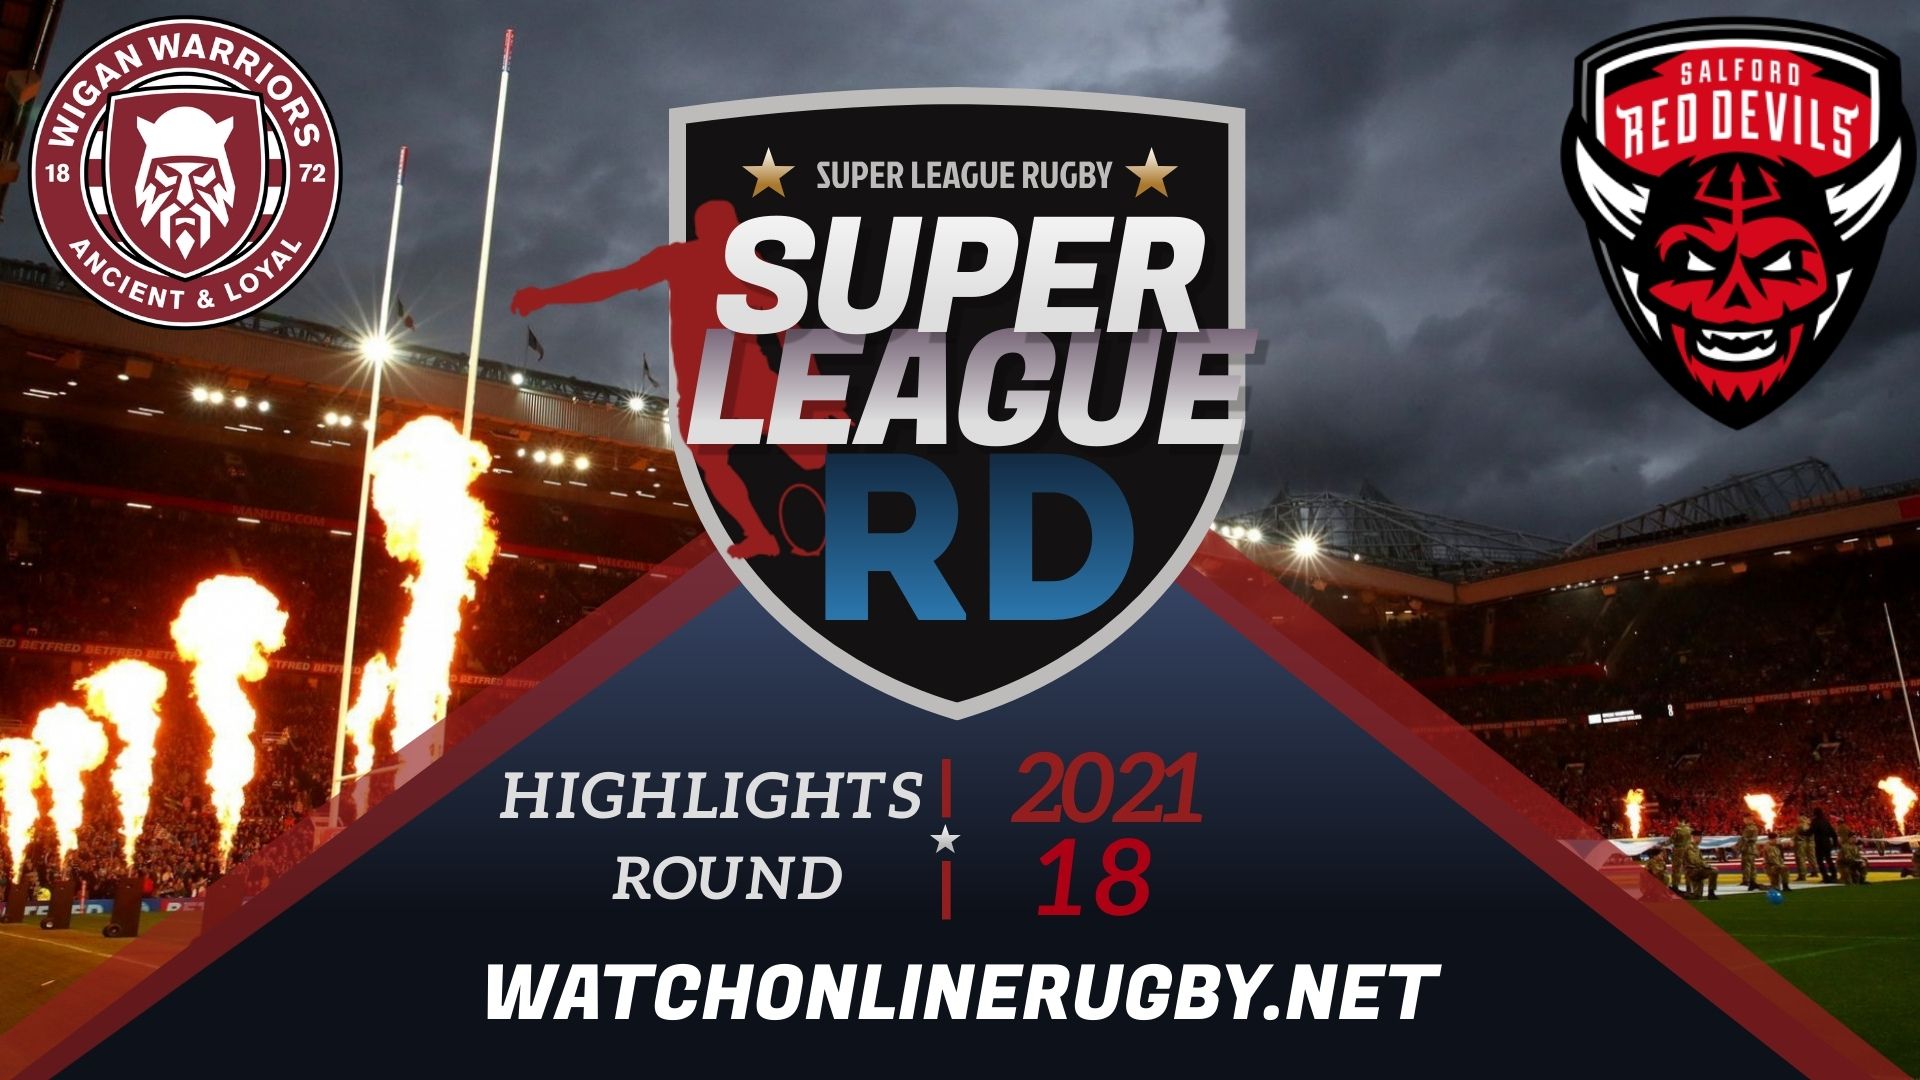 Wigan Warriors Vs Salford Red Devils Super League Rugby 2021 RD 18